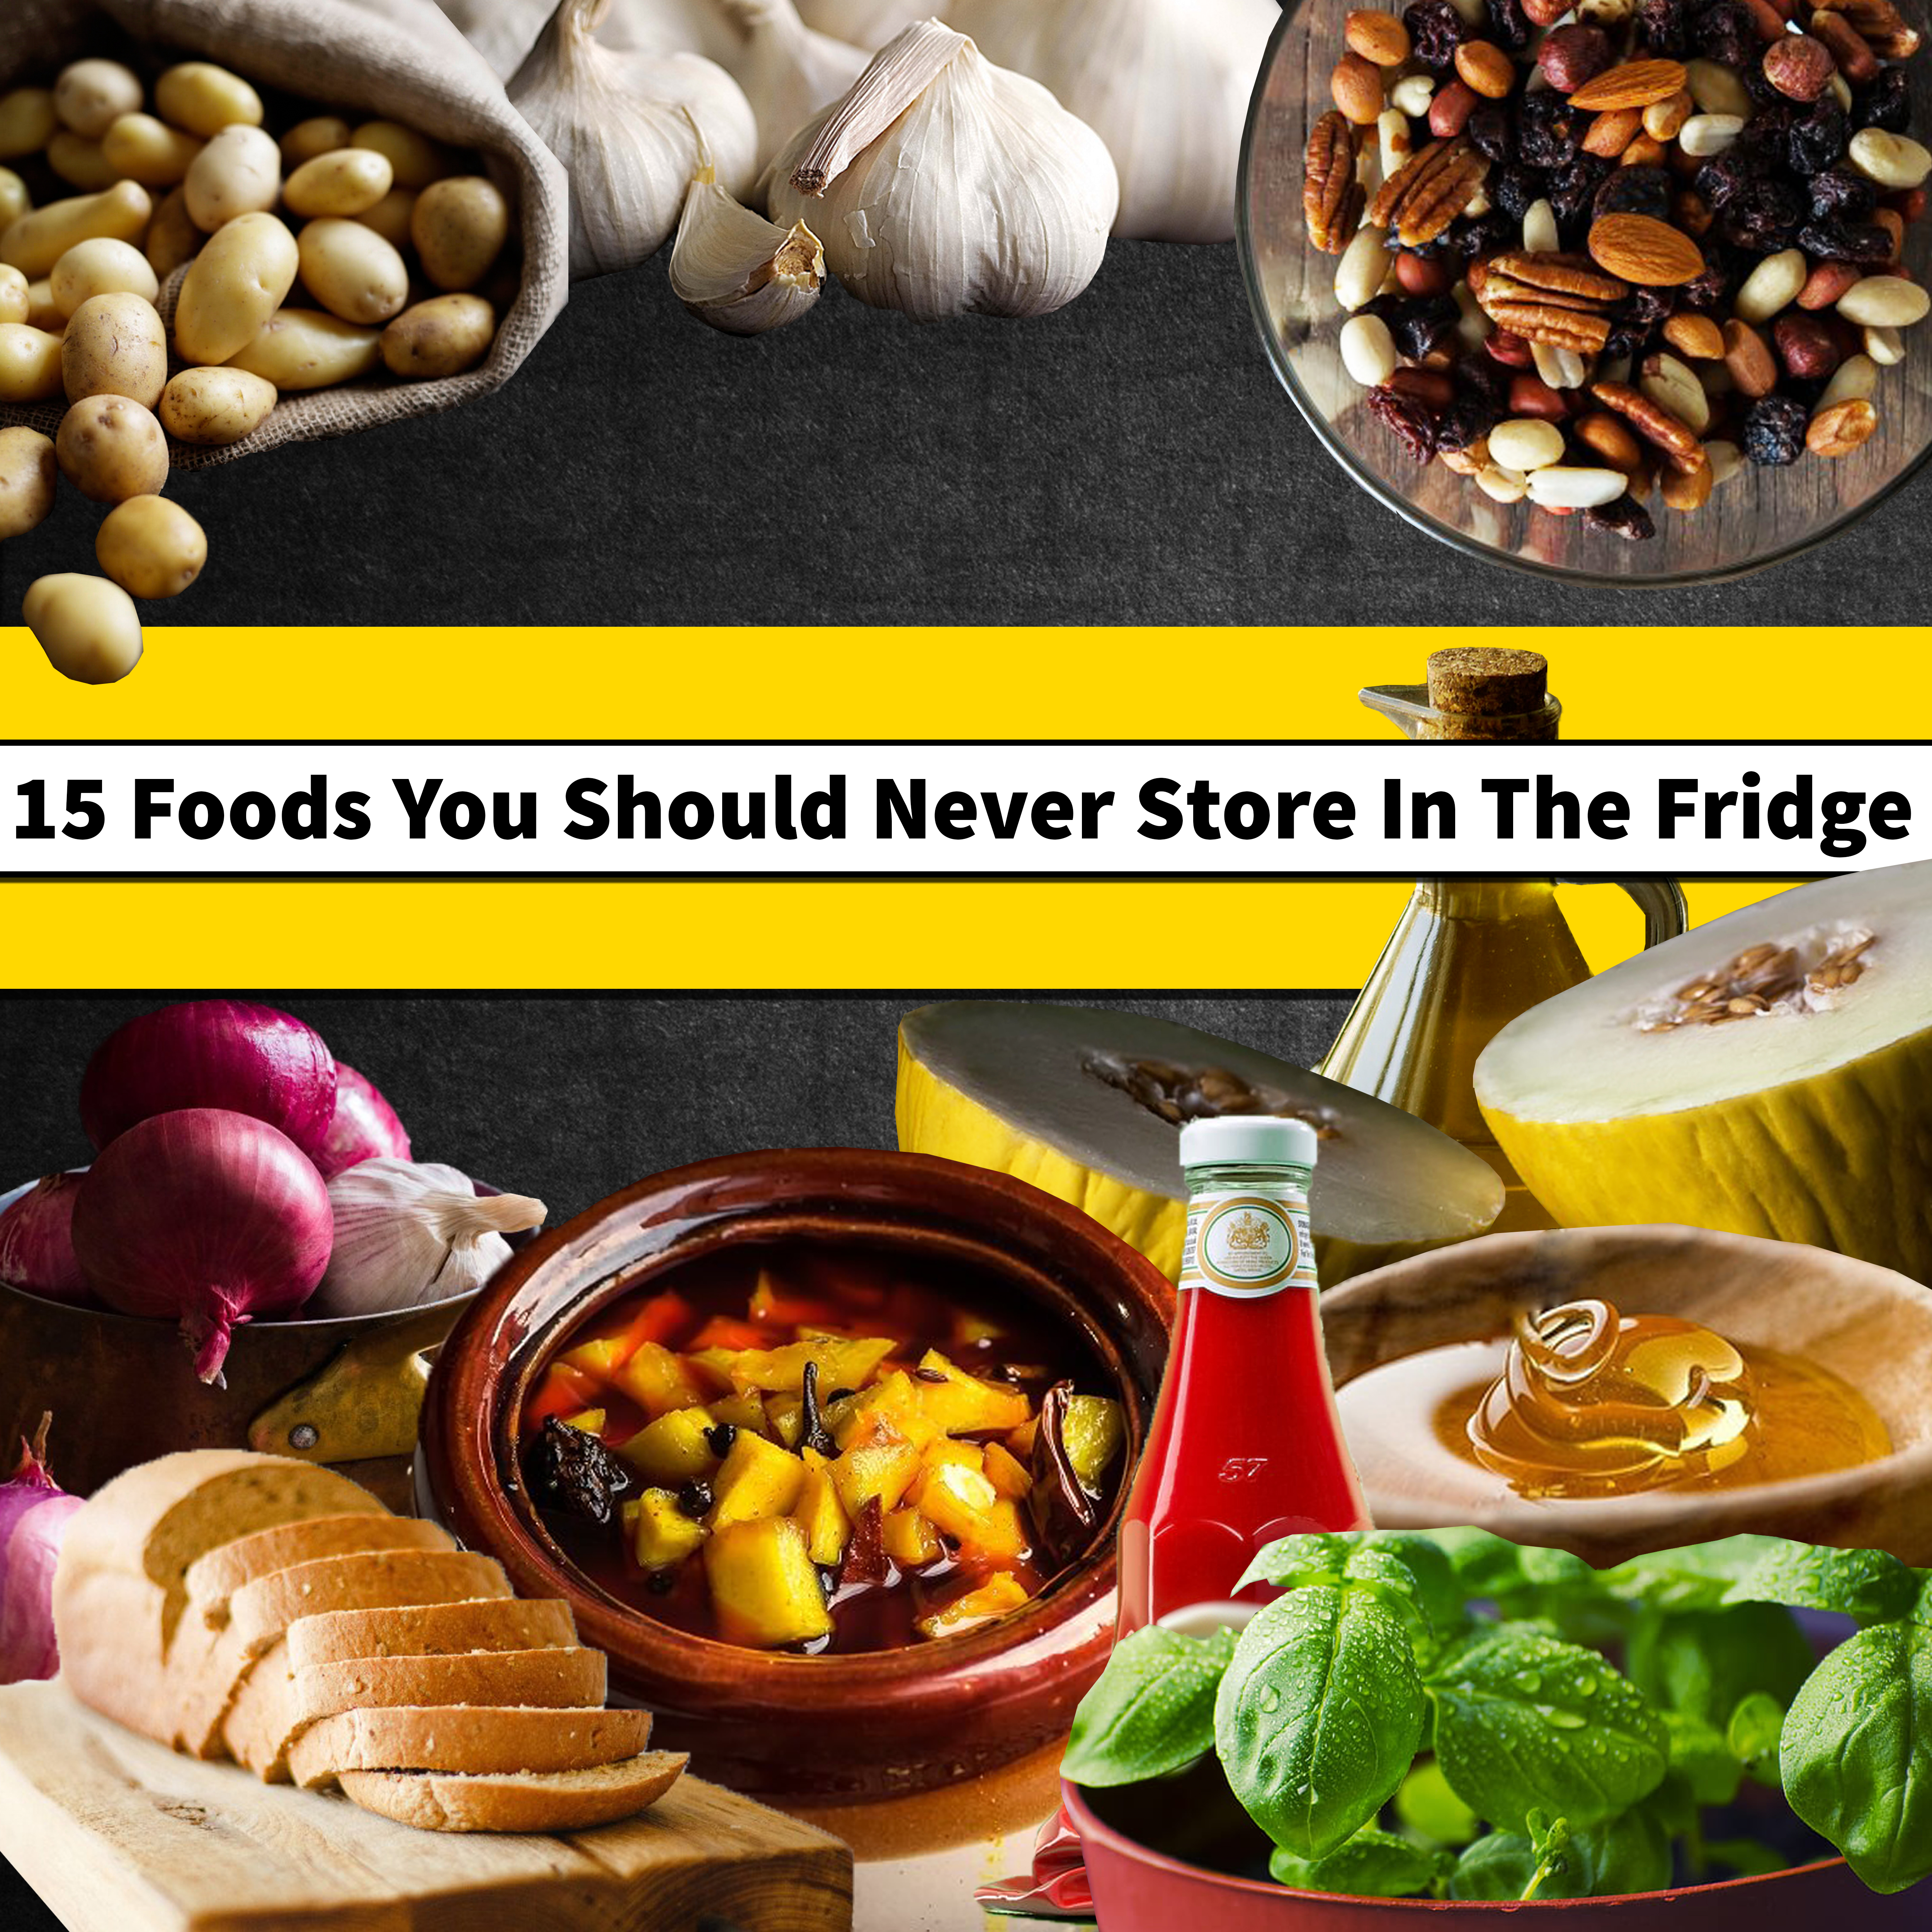 15 Foods You Should Never Store In The Fridge